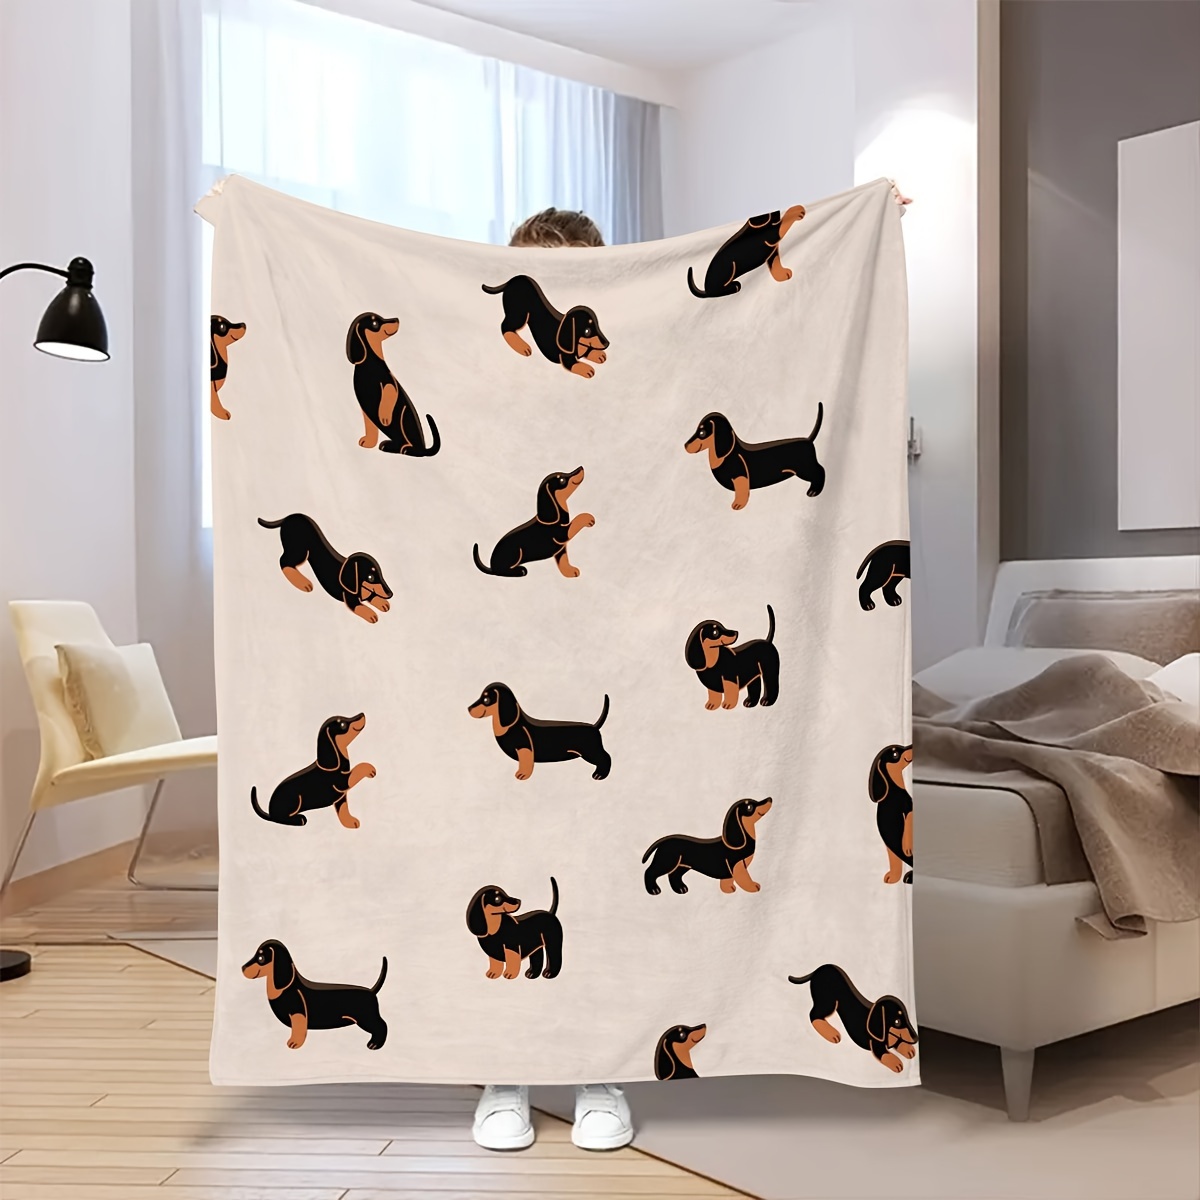 

1pc Dachshund Blanket Throw, Dachshund Dog Flannel Throw Blanket For Human Dogs, Lightweight Soft Cozy Plush Fleece Cute Puppy Dog Lover Blanket For Bedroom Living Rooms Sofa Couch